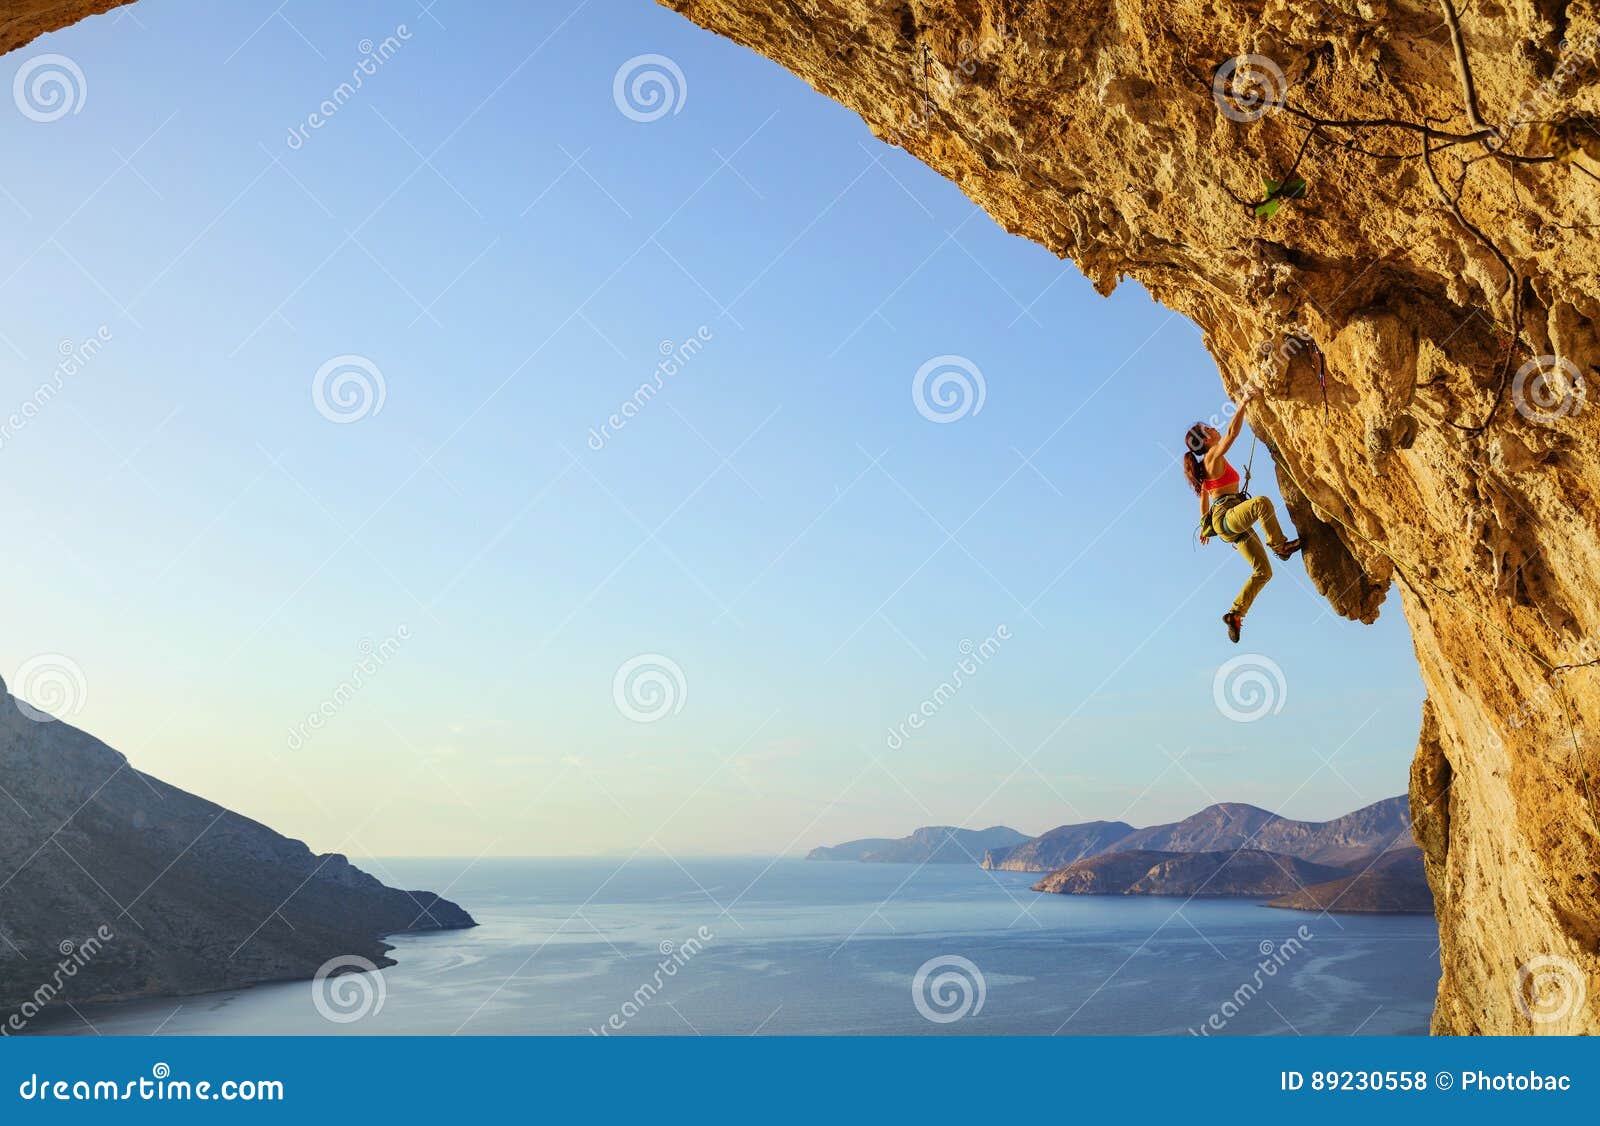 young woman climbing challenging route in cave at sunset